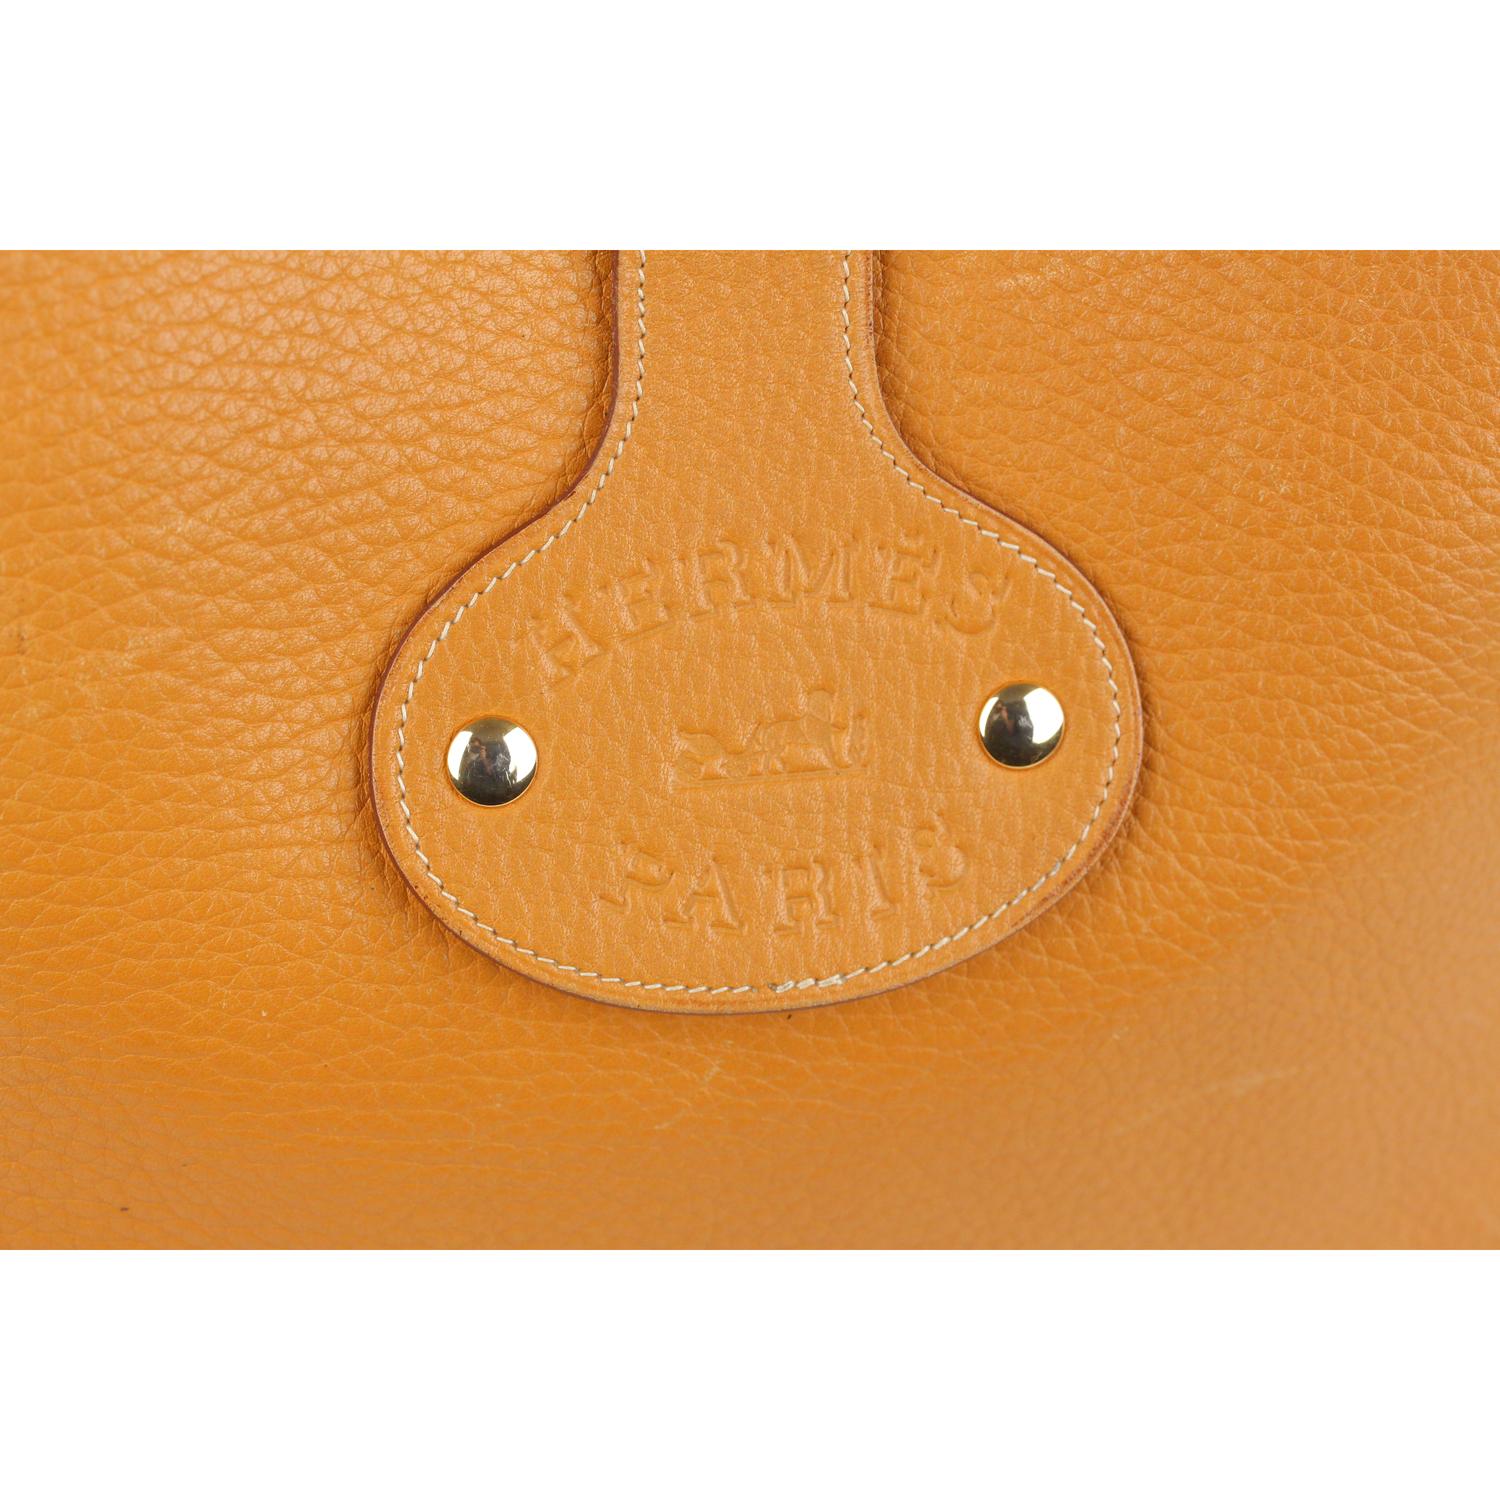 Vintage rare Hermes 'Rodeo' crossbody  ba, crafted from a textured tan leather and featuring an adjustable  shoulder strap, an open top with a fold over strap with snap button closure. 'HERMES PARIS' logo patch on the back. Suede interior. 'Hermes